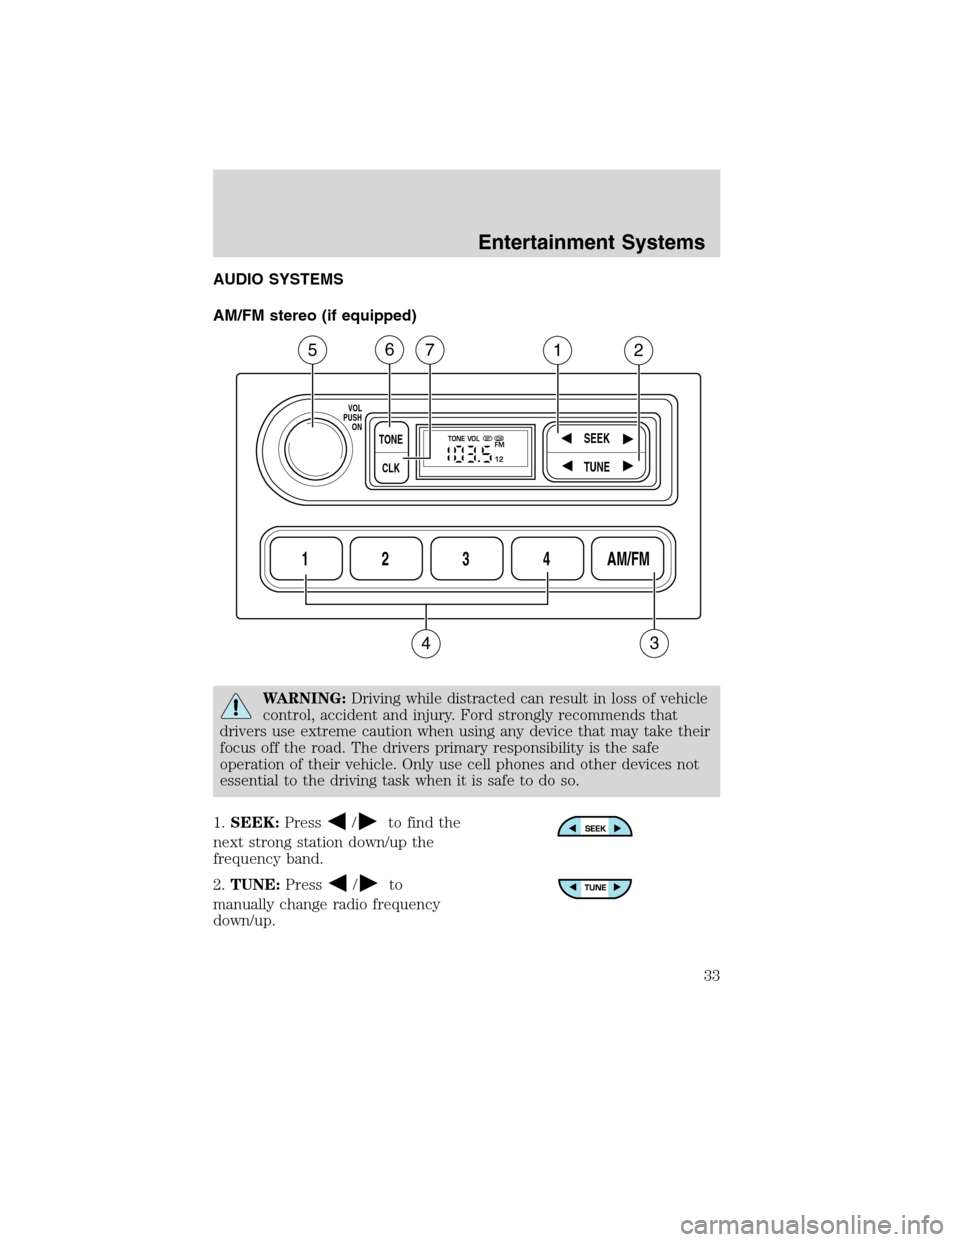 FORD F750 2010 12.G Owners Guide AUDIO SYSTEMS
AM/FM stereo (if equipped)
WARNING:Driving while distracted can result in loss of vehicle
control, accident and injury. Ford strongly recommends that
drivers use extreme caution when usi